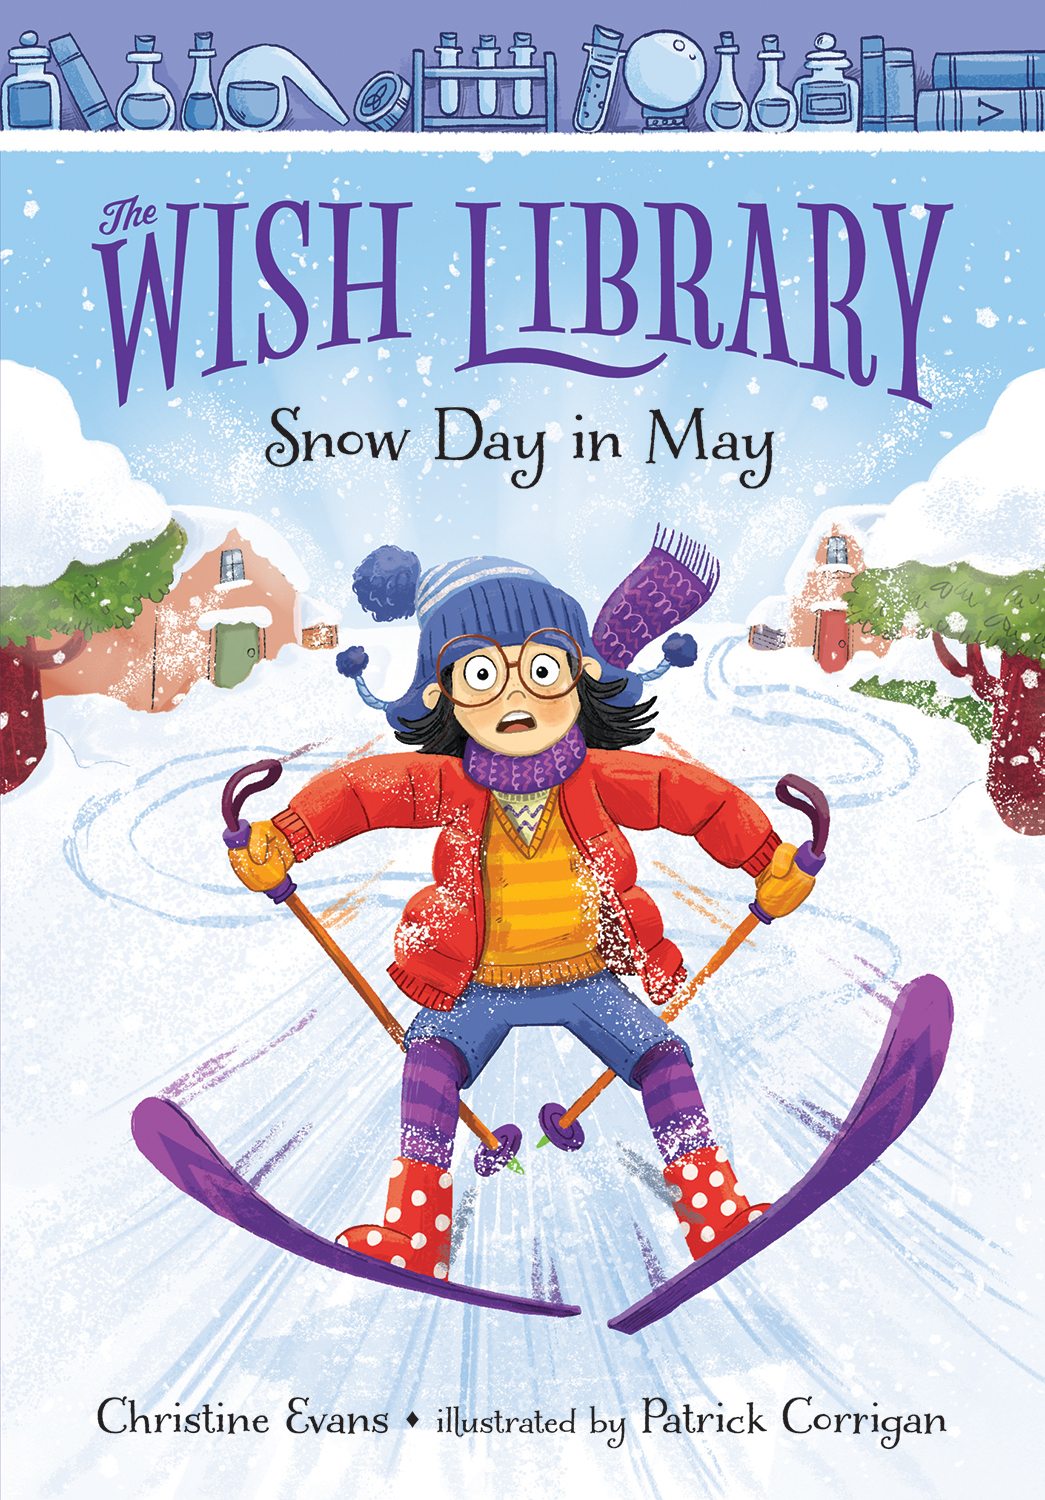 Wish Library - Snow Day In May Book Cover 